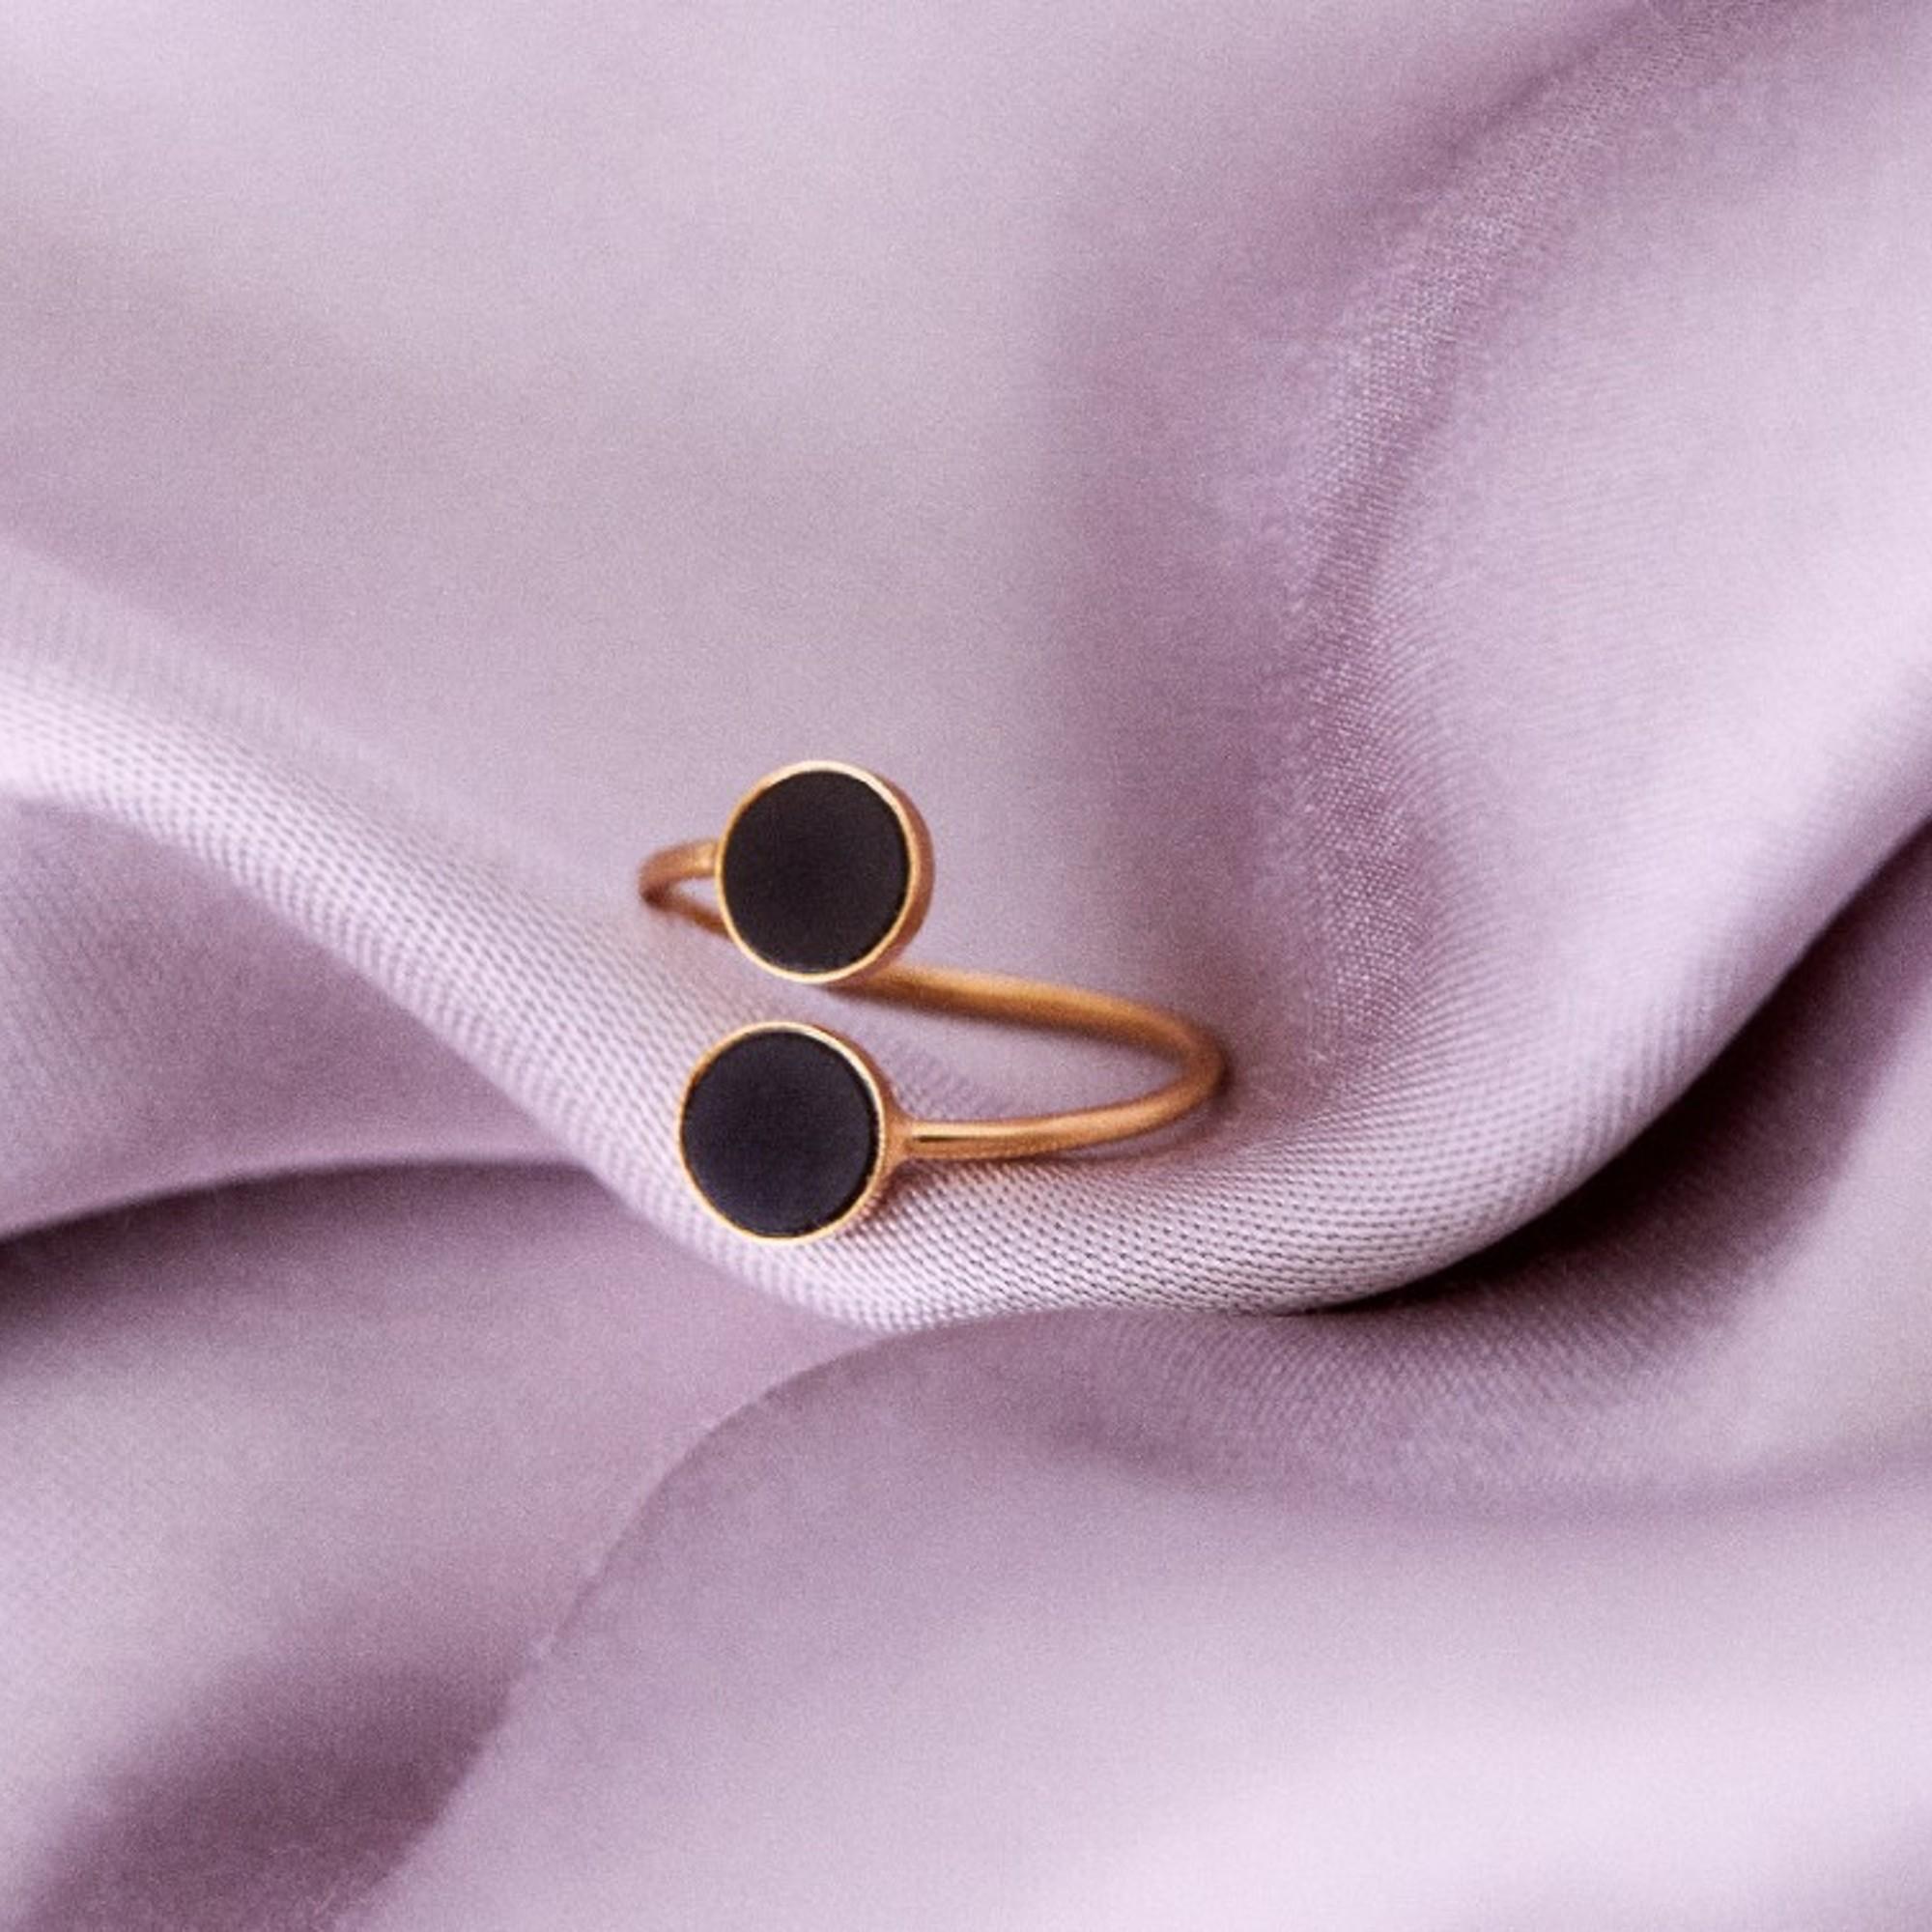 Our gold open ring is a subtle and unique accessory. The ring beautifully embraces the finger, while two deep-coloured stones give it an edgy touch. The ring fits perfectly with both classic and modern stylings.
The ring is decorated with a